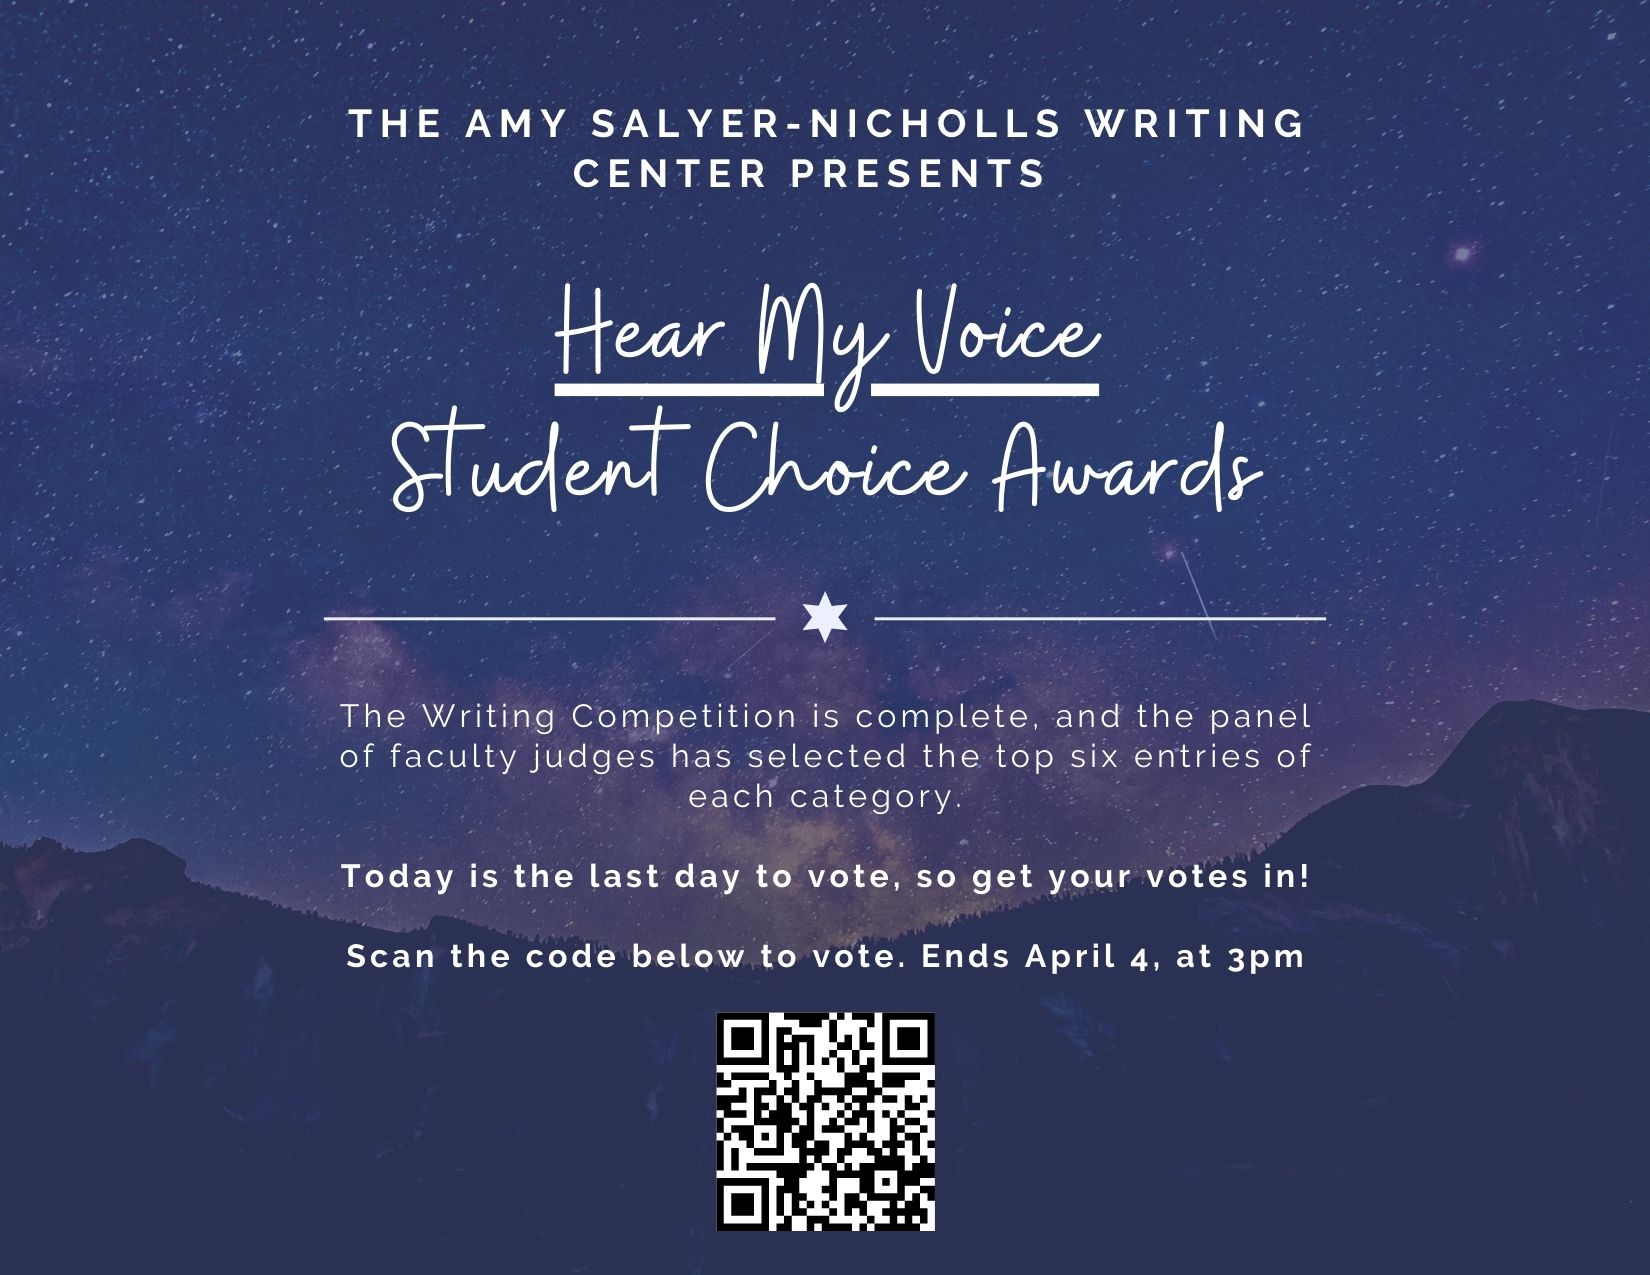 Last day to vote student choice